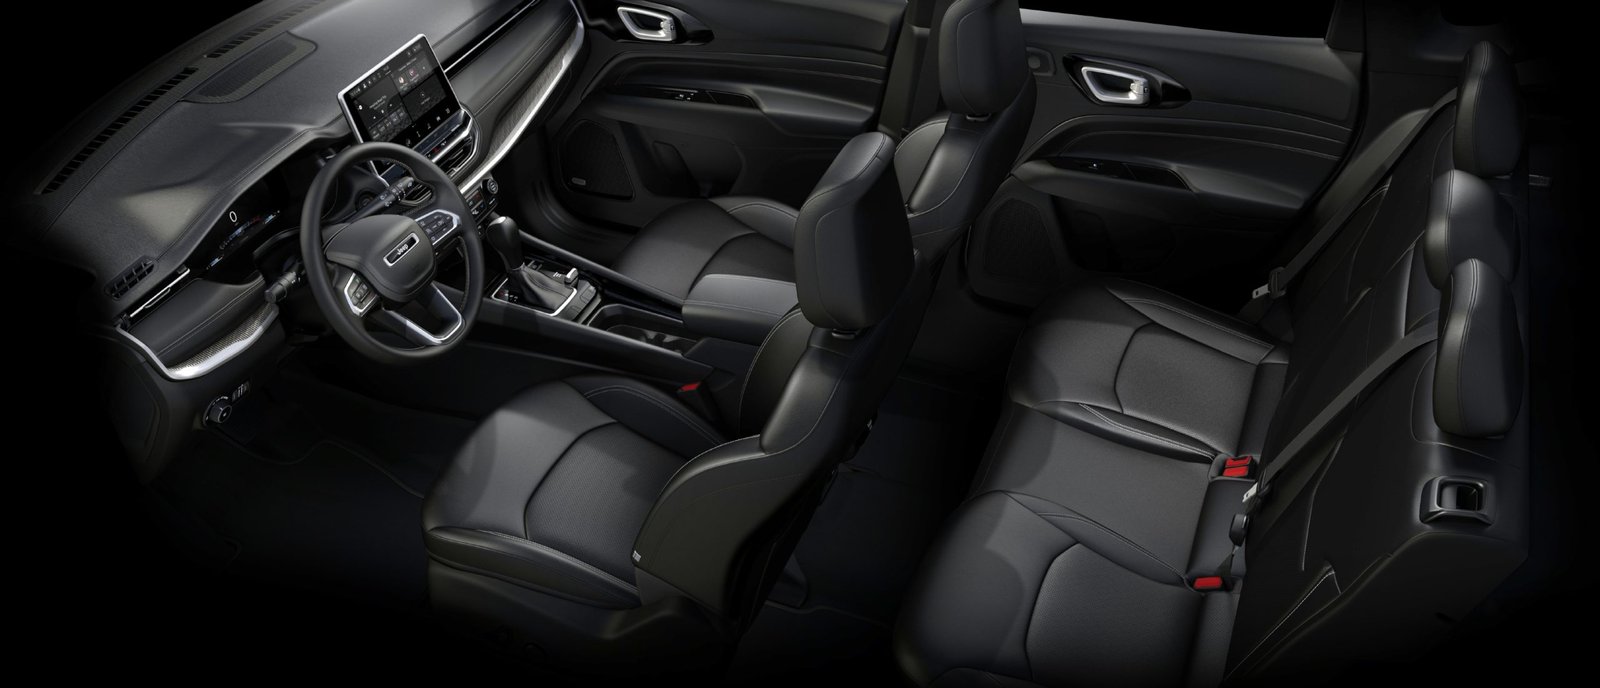 2022 Jeep® Compass High Altitude spacious, modern interior with premium leather-trimmed seats.